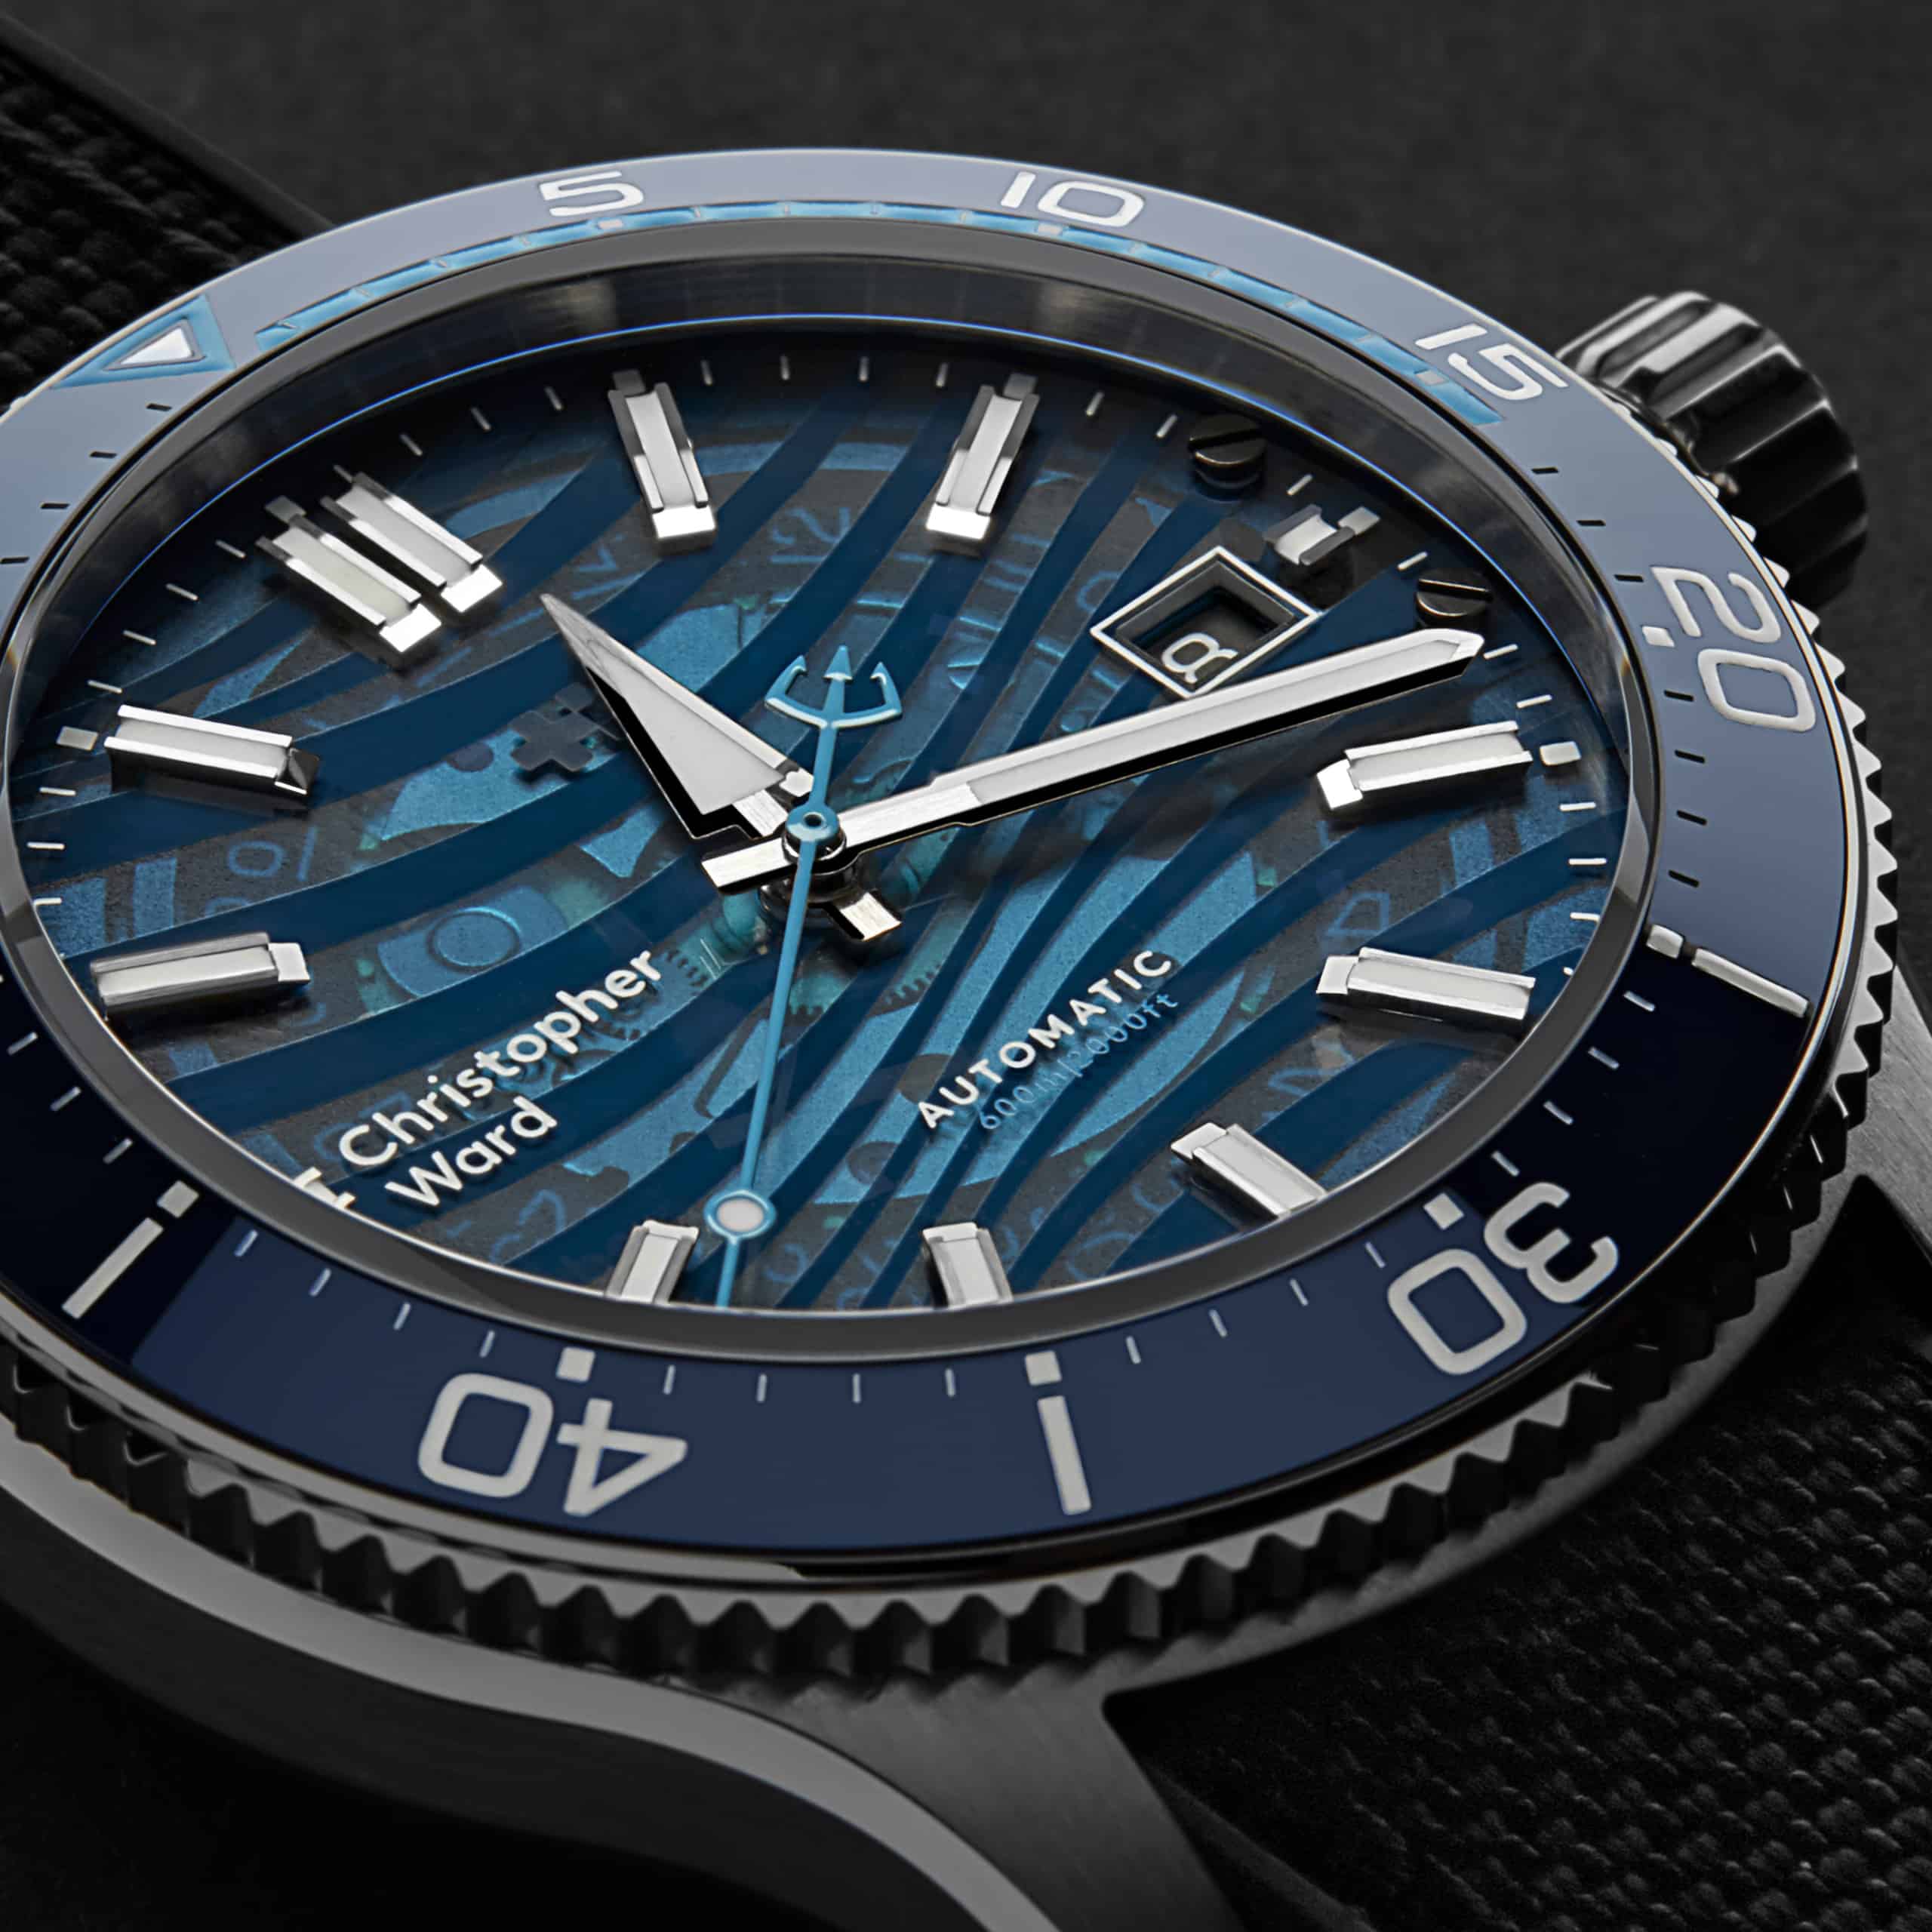 Christopher Ward Collaborates with Blue Marine Foundation On C60